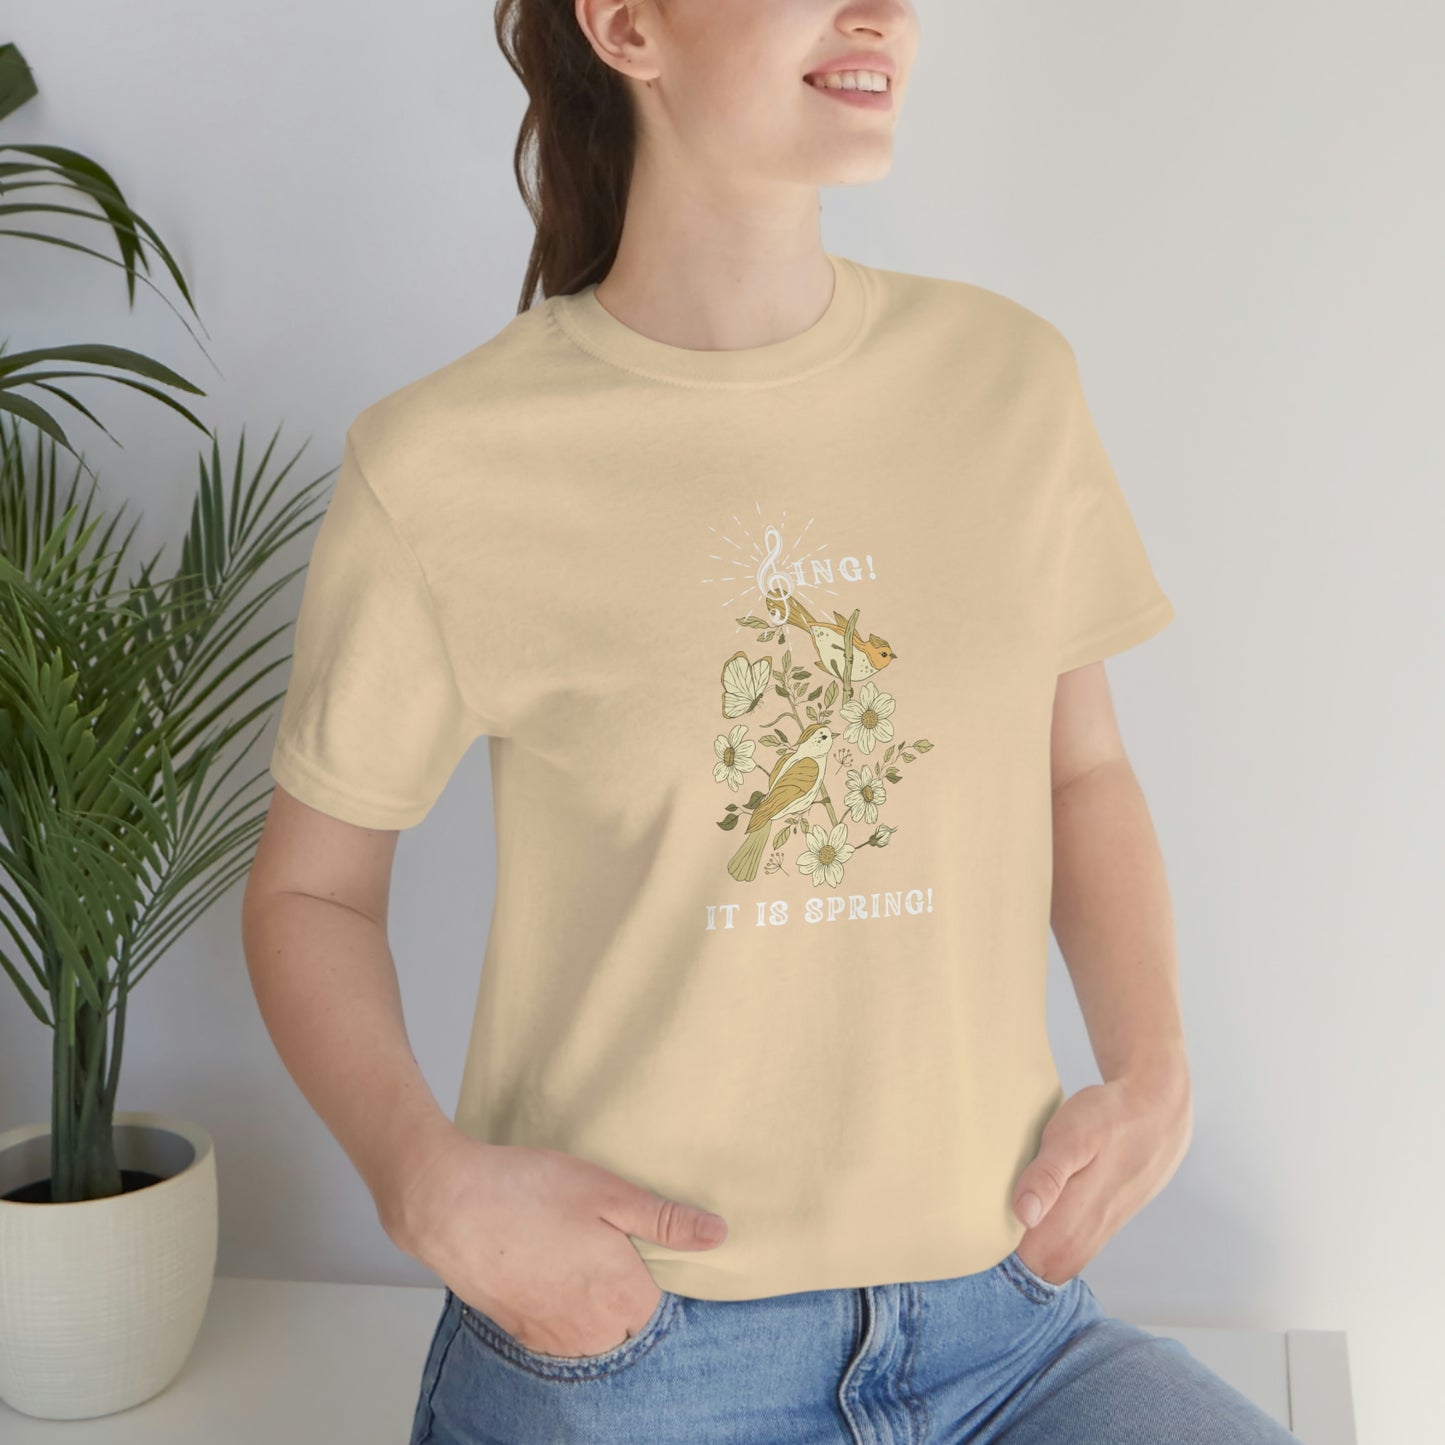 SING IT IS SPRING UNISEX  CREW NECK T SHIRT GIFT WITH WHITE FONT